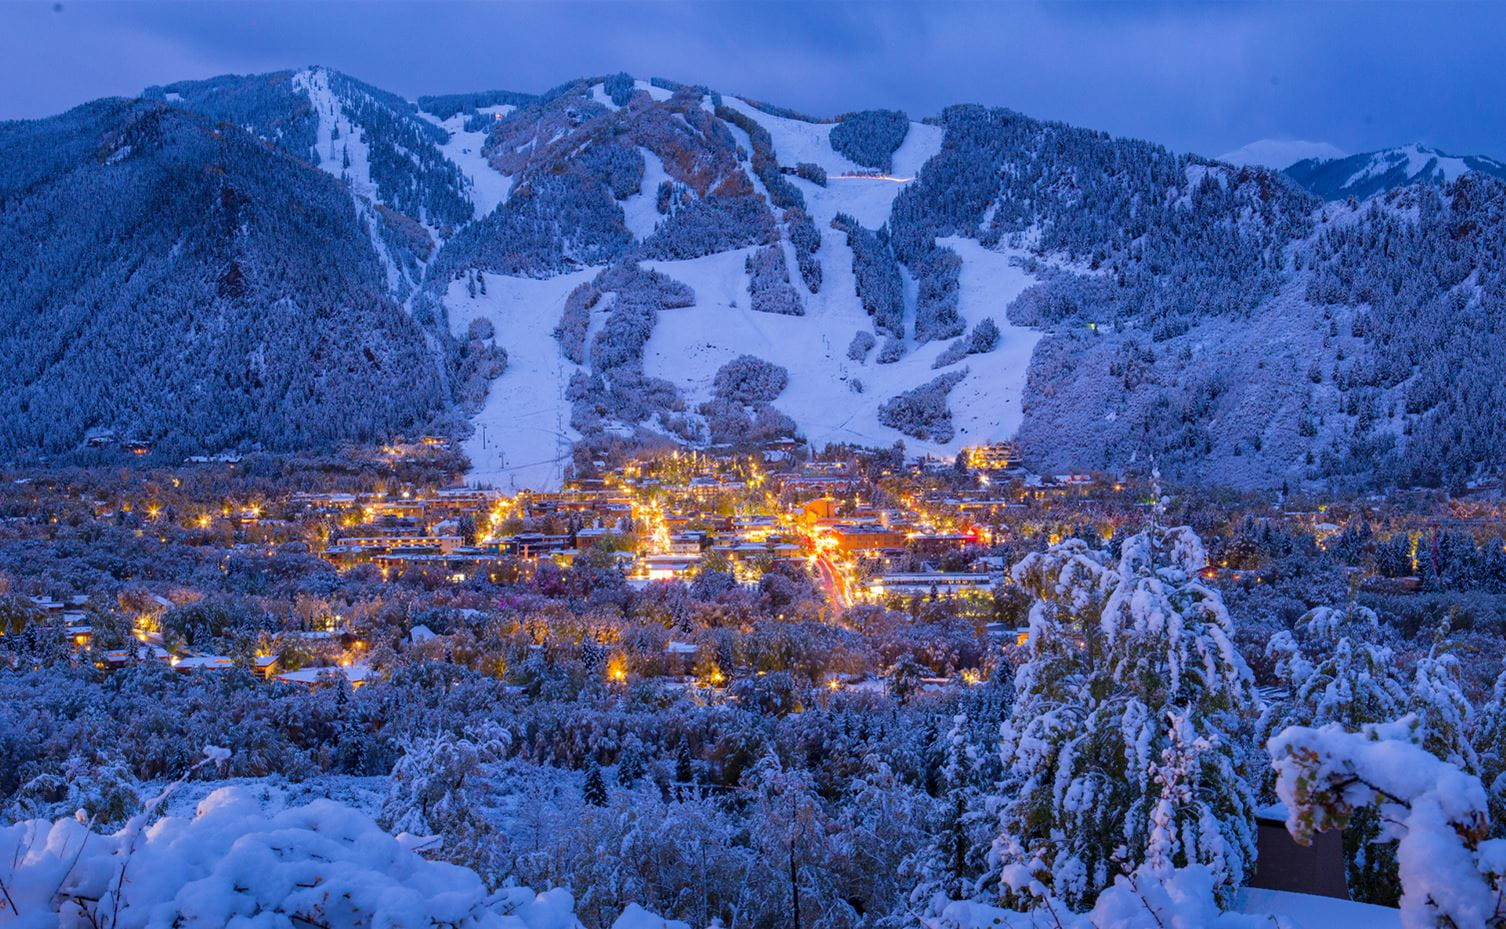 Aspen glows at dusk during a wintery scene in Colorado